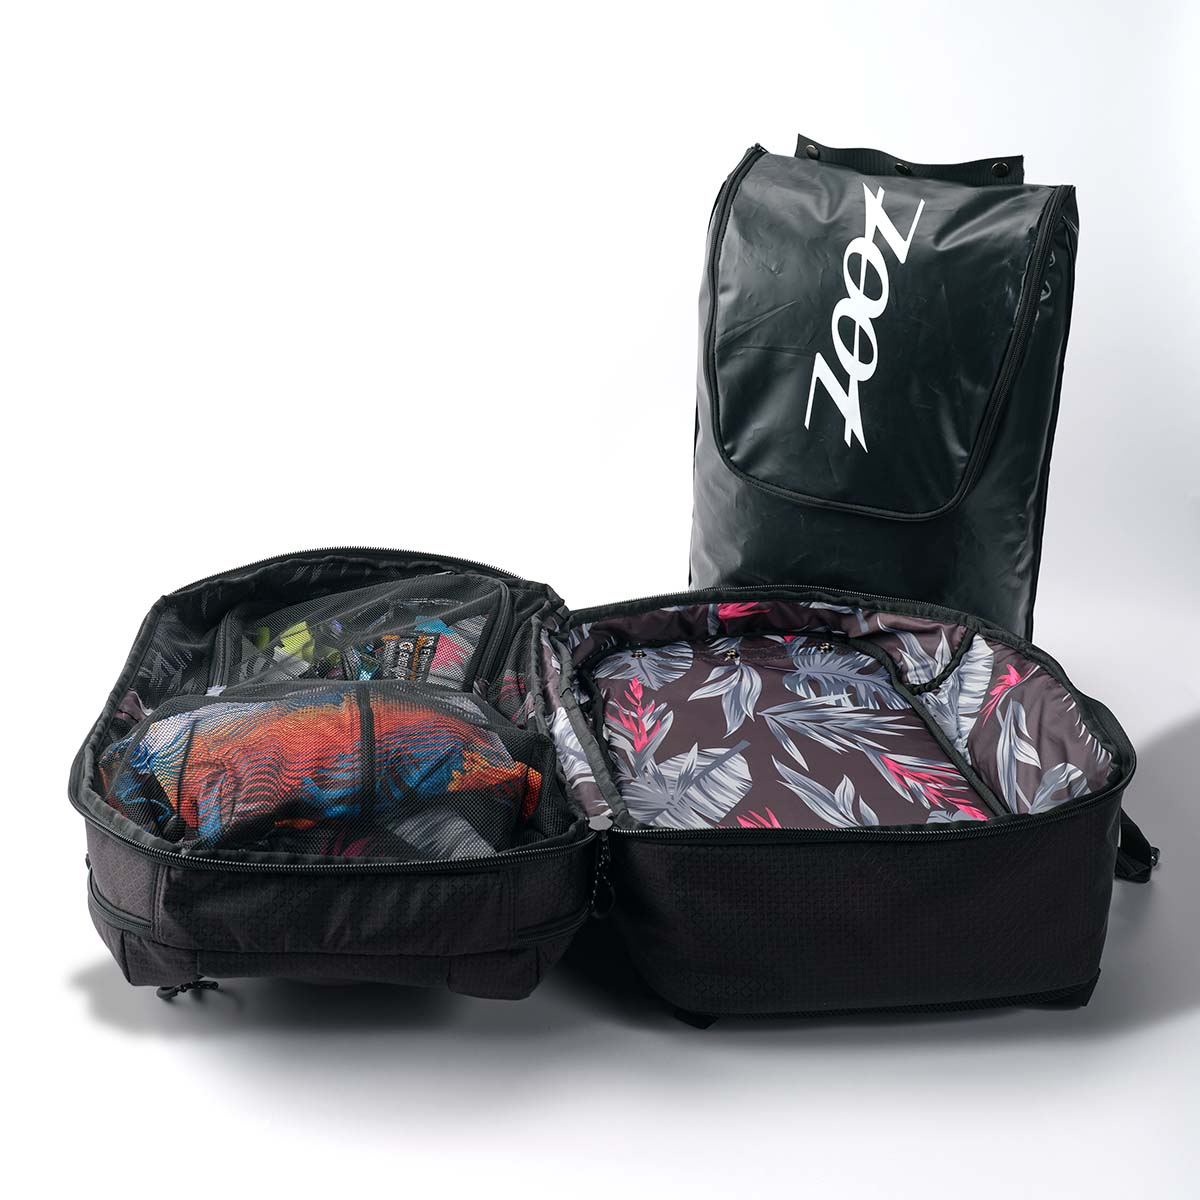 Igloo Coolers | Marine Ultra 24-Can Square Cooler Bag in White/Black